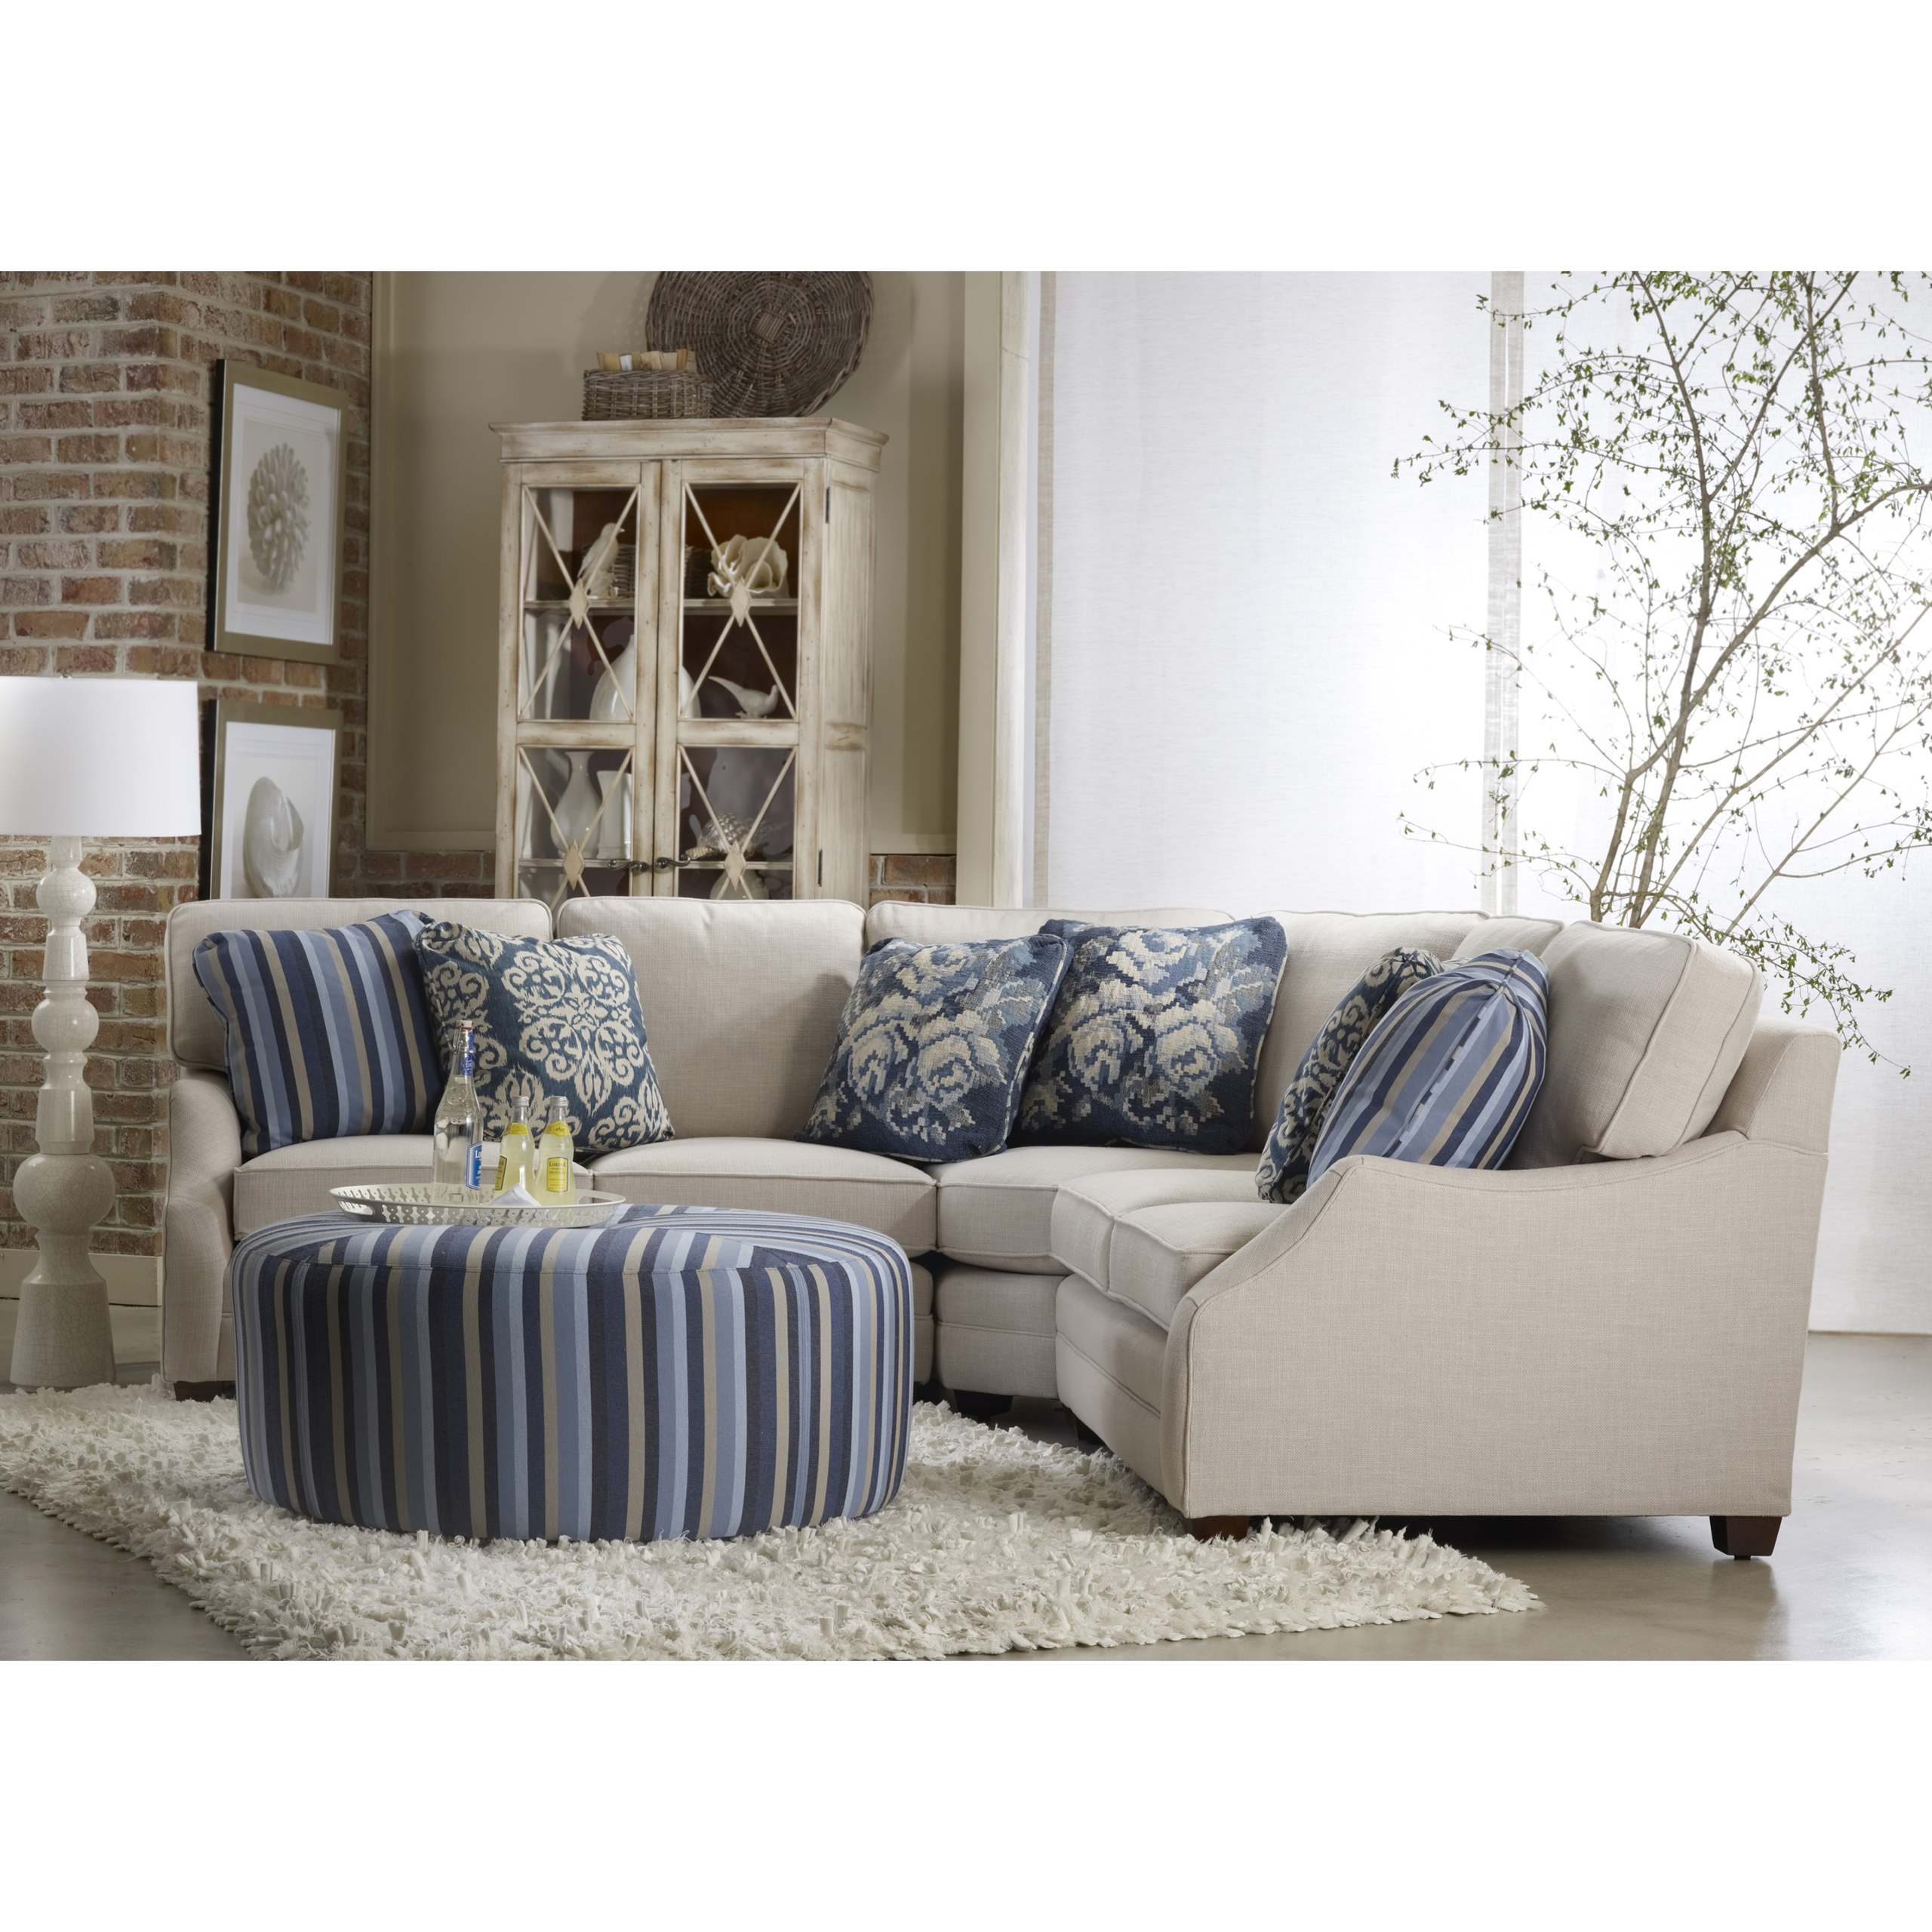 Sam moore rita sectional with ottoman small reclining sectional 1